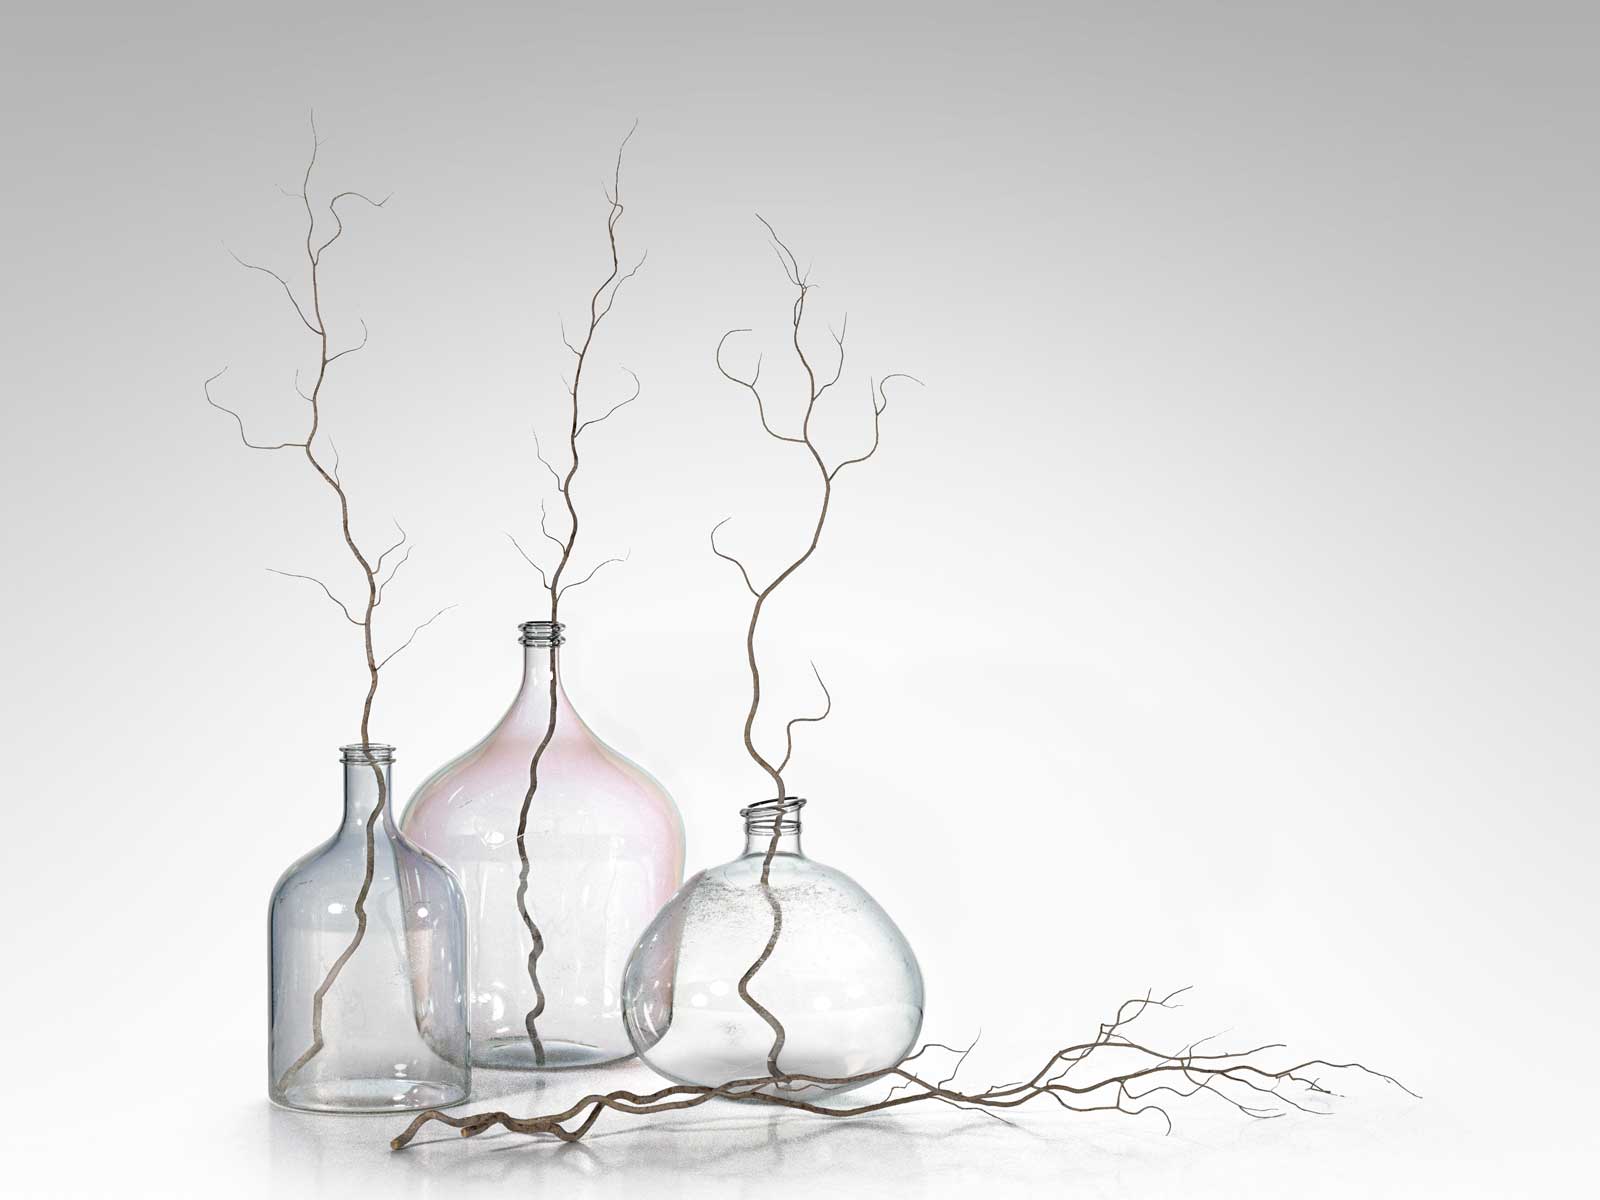 Bottle Vases with Branches